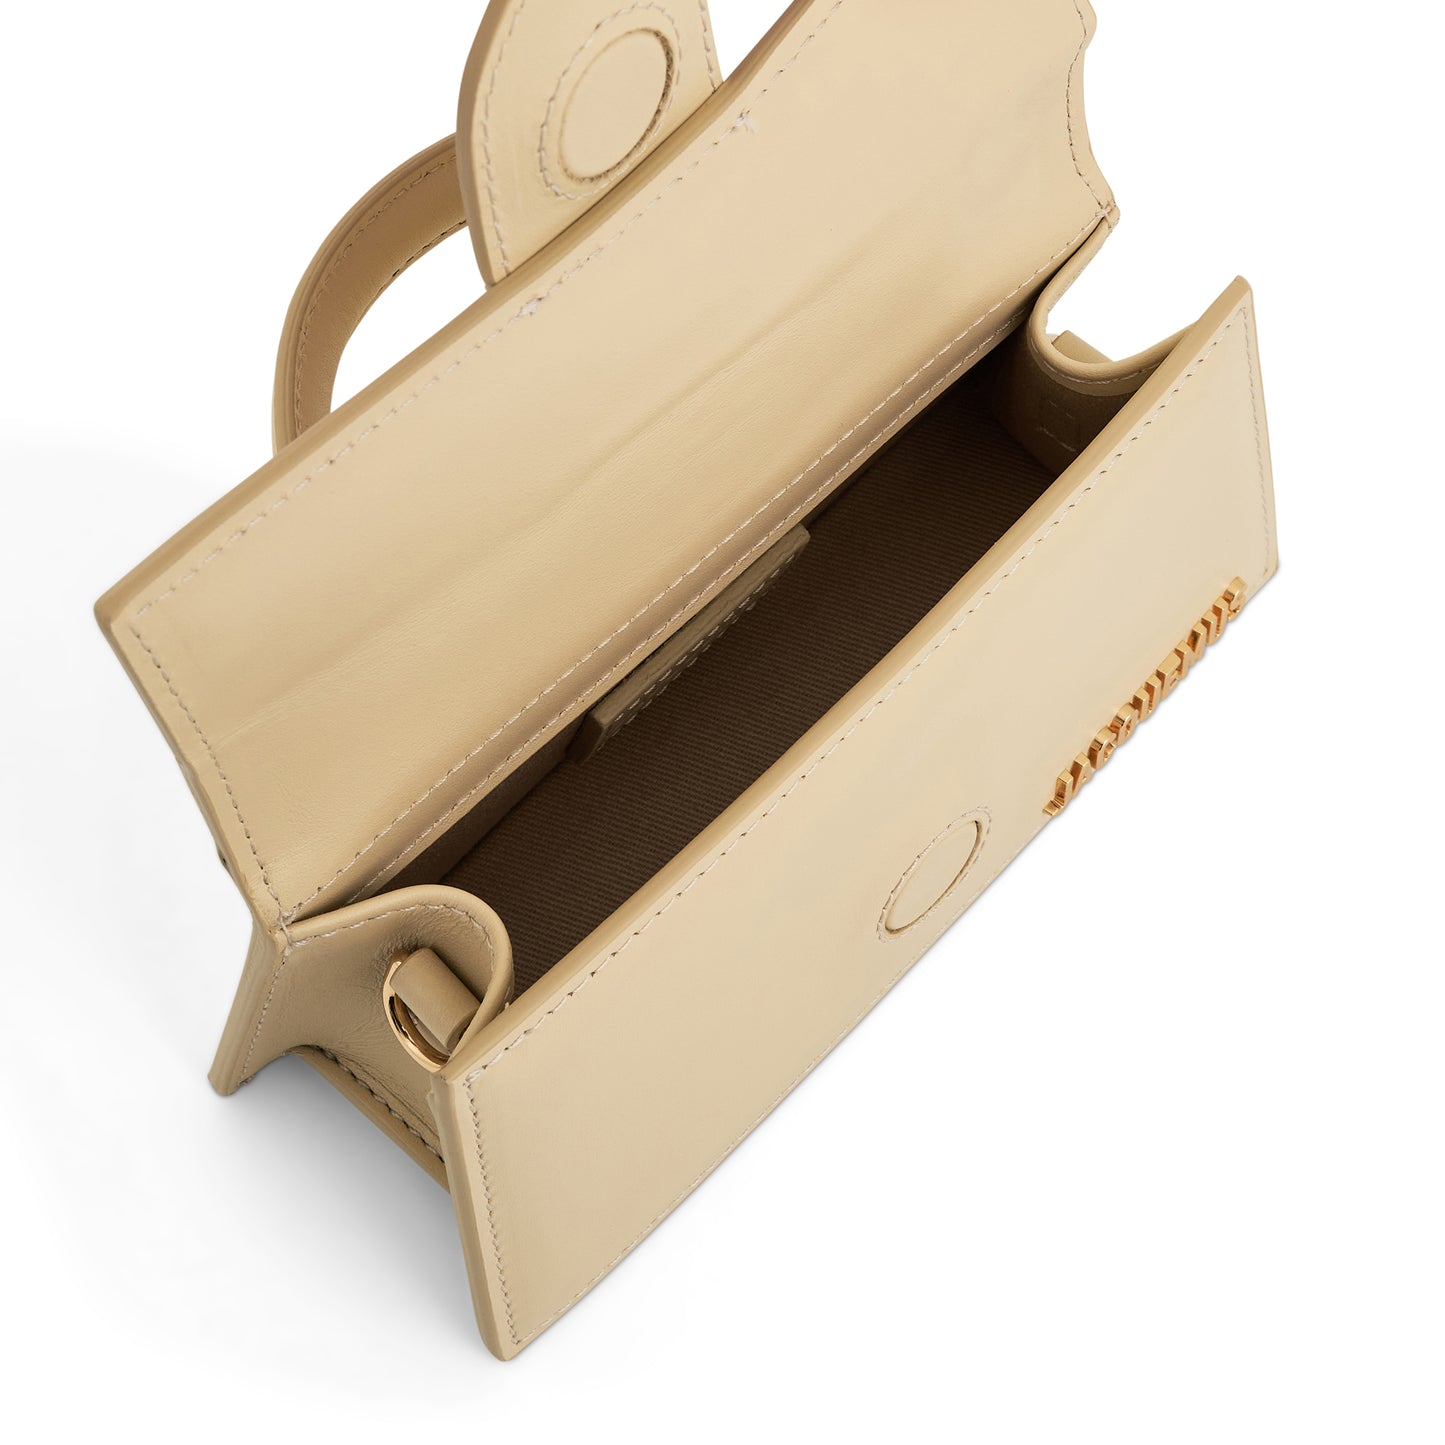 Le Bambino Leather Bag in Ivory